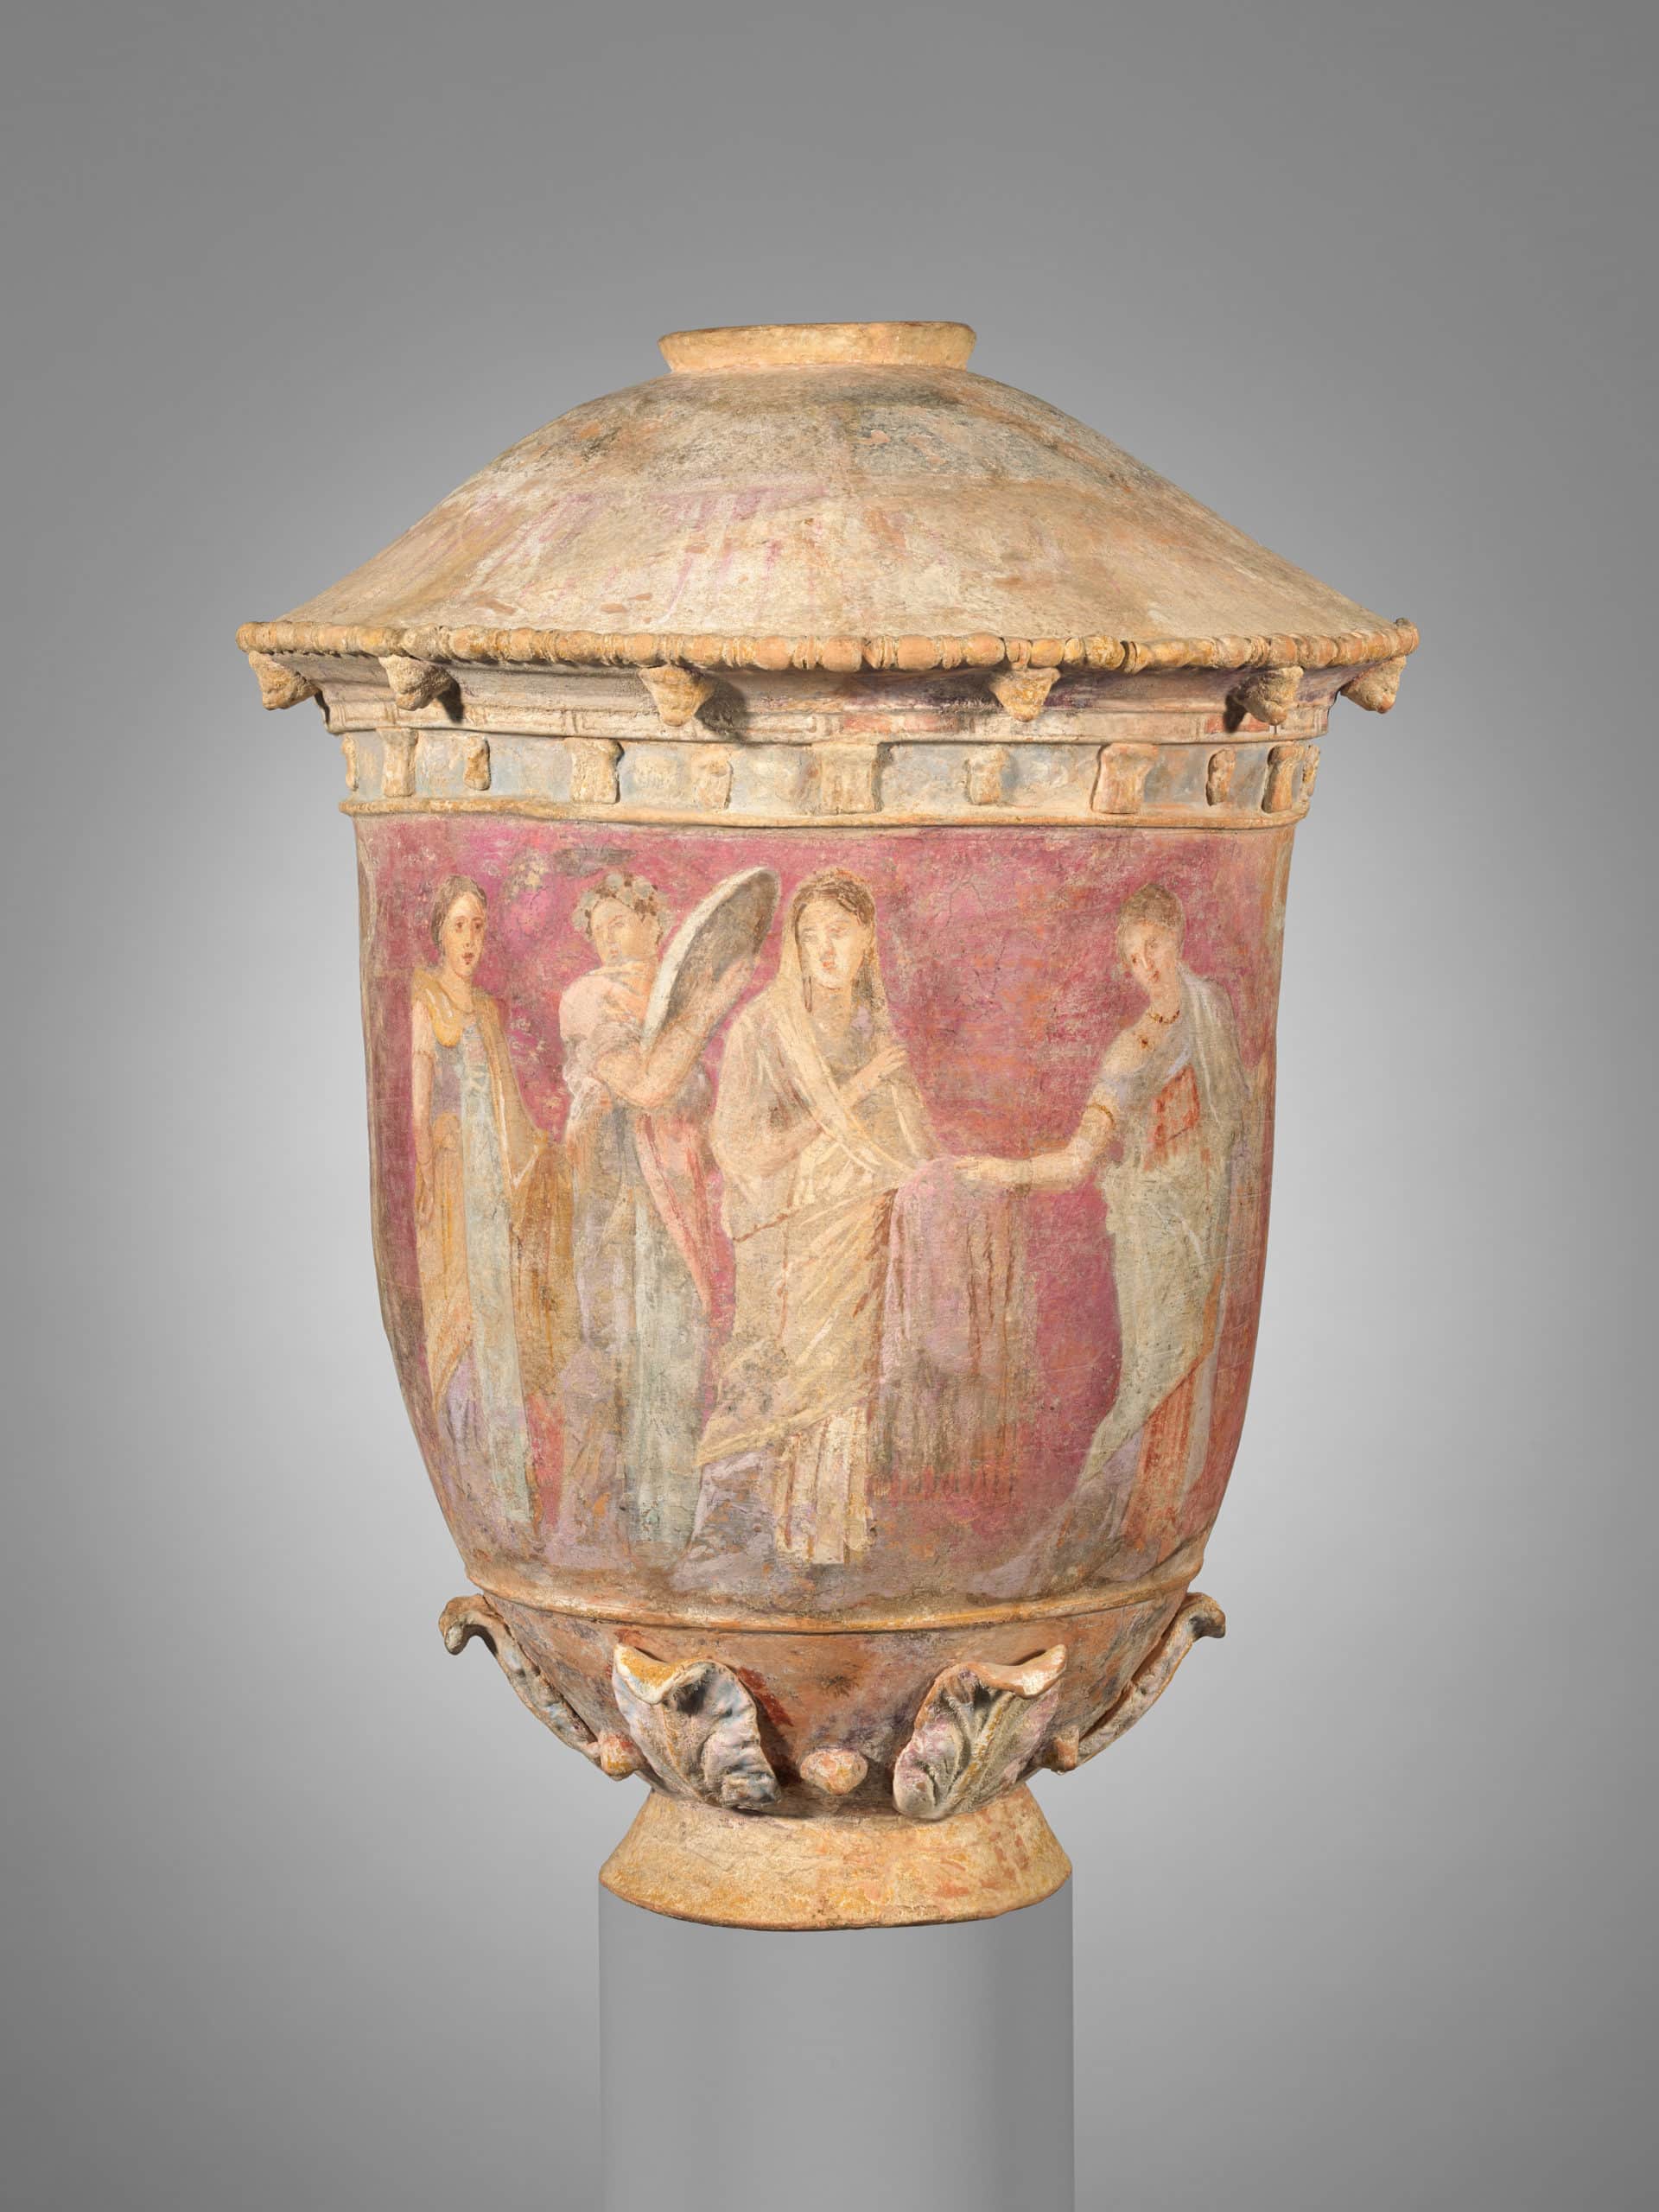 Terracotta vase from ancient Greece with painted colors clearly visible. (Source: Metropolitan Museum of Art)